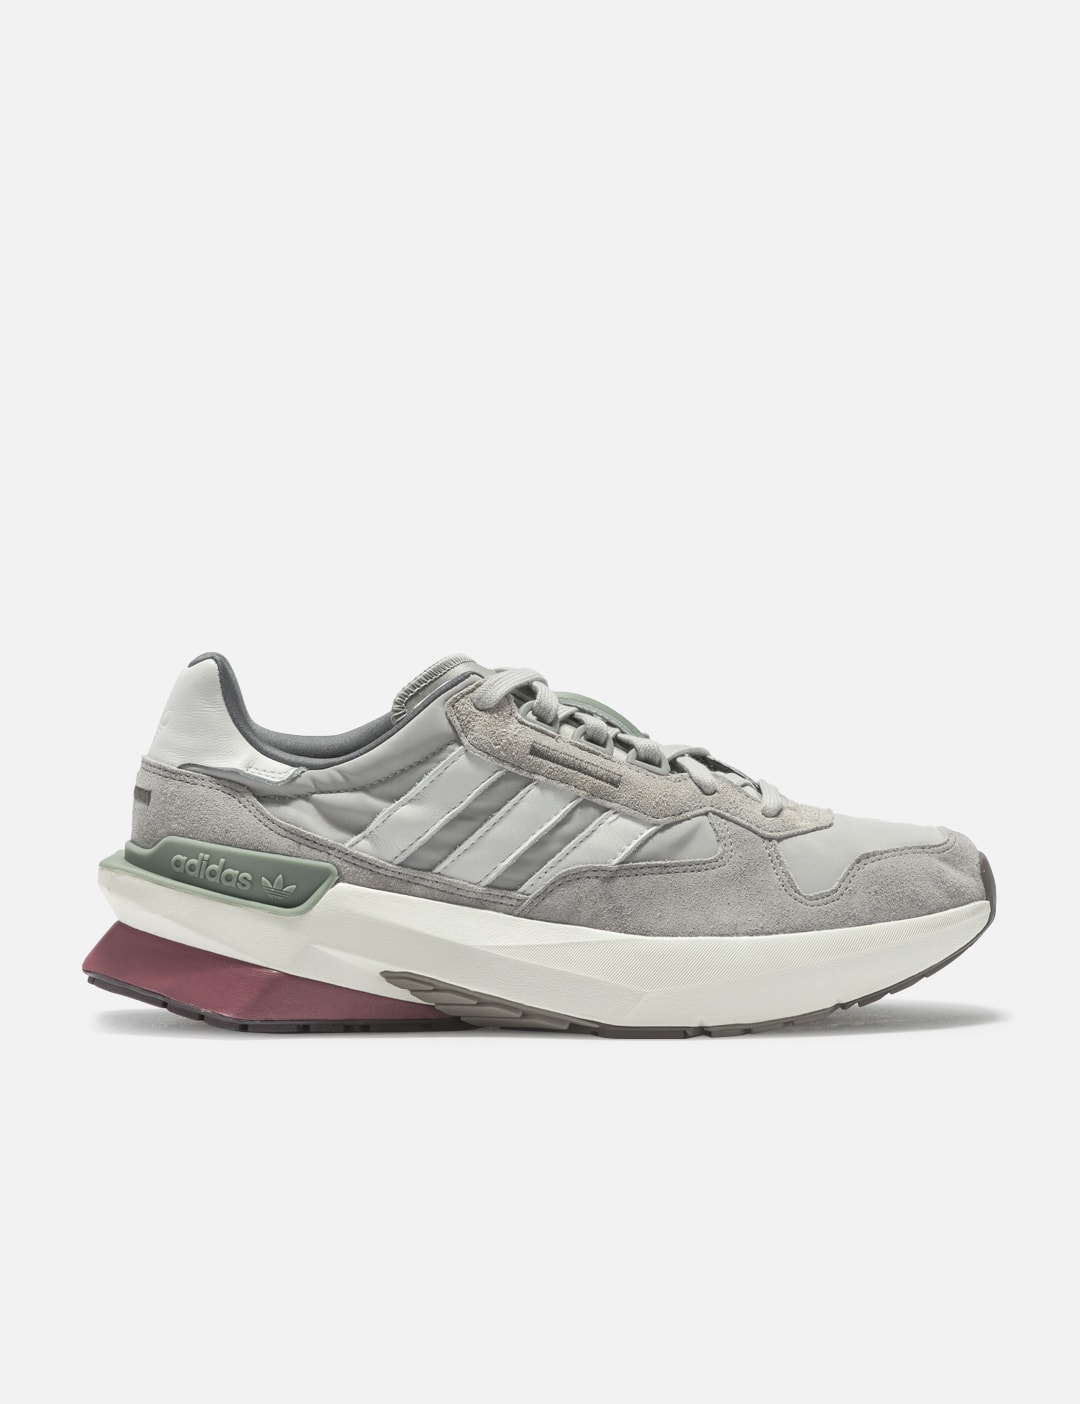 Treziod Globally HBX - Curated Adidas Fashion PT and | by Originals Hypebeast Lifestyle -